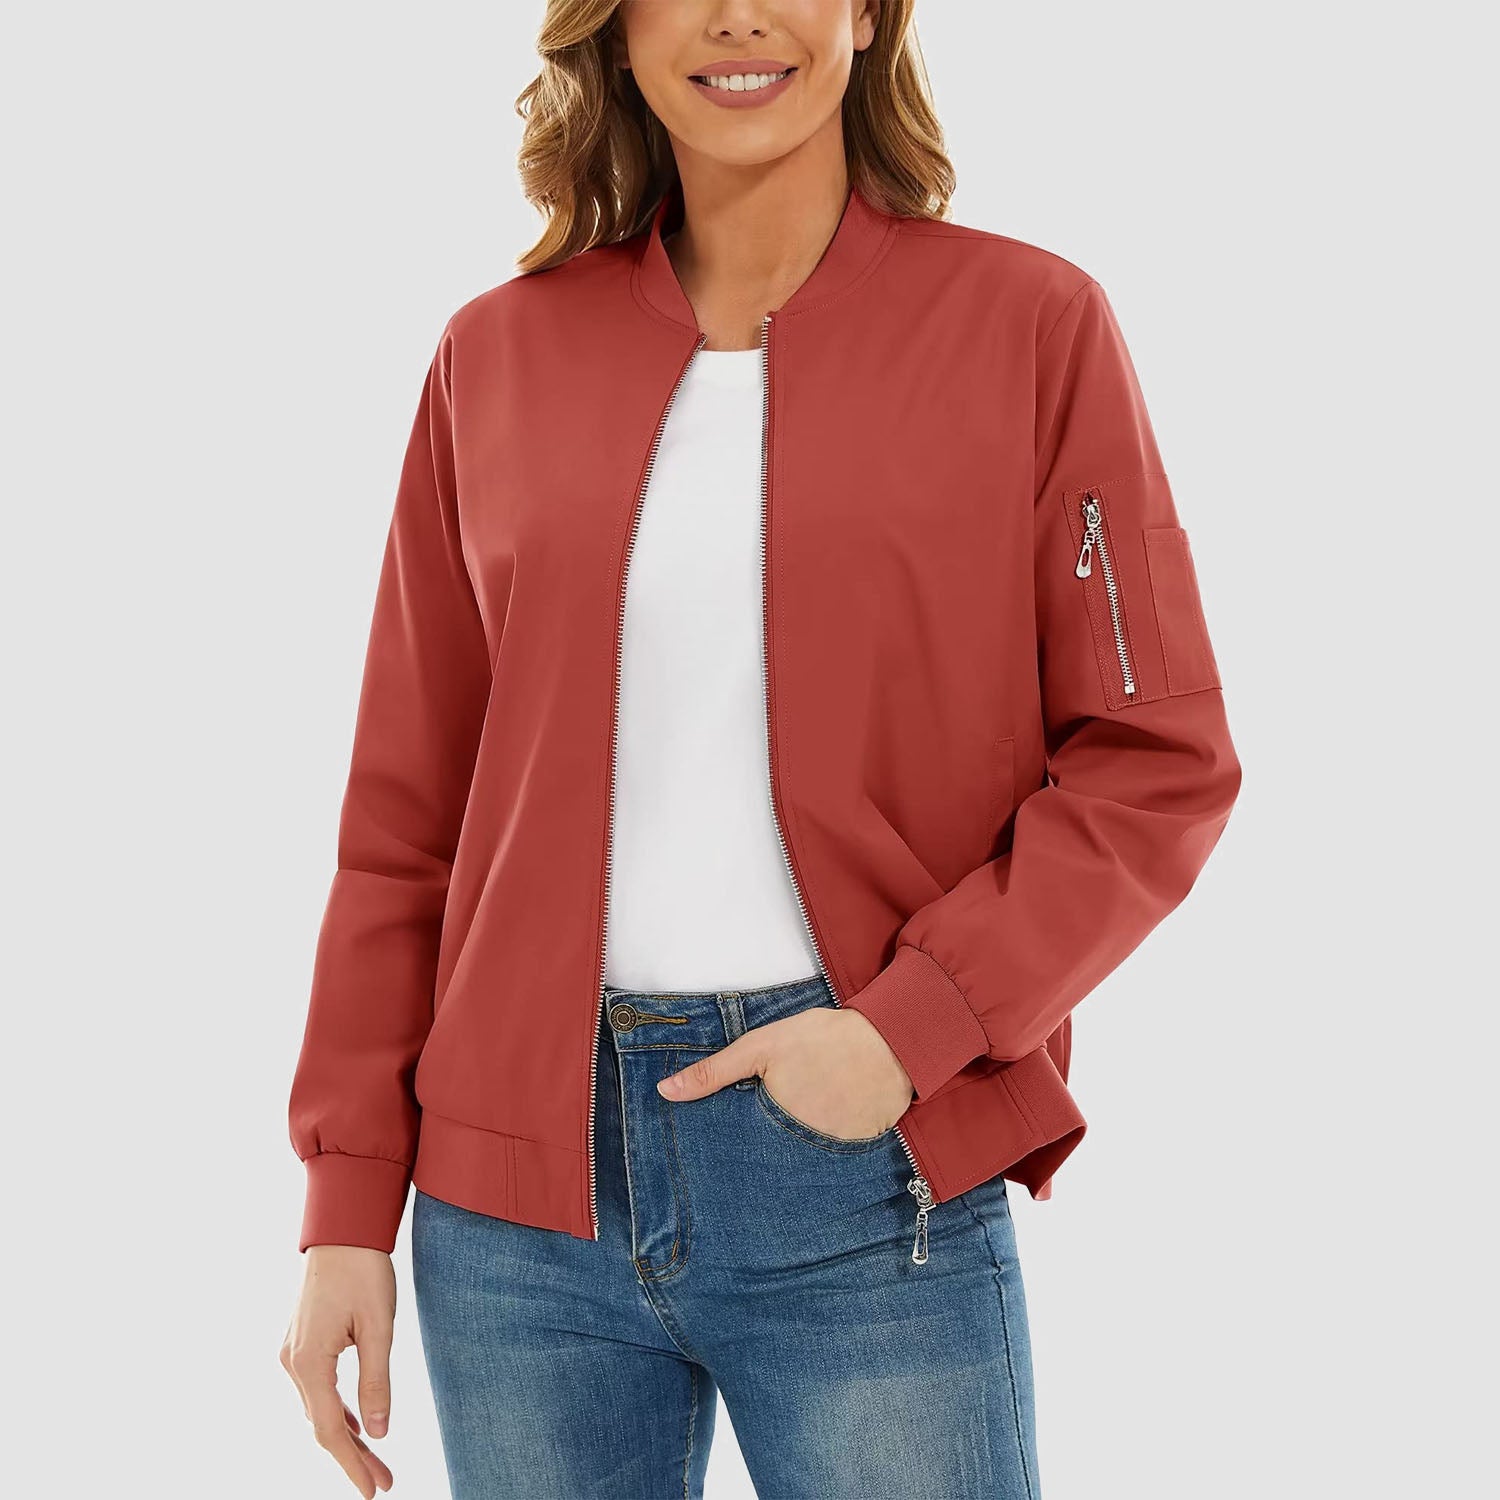 Women's Bomber Jackets Casual Jacket with 3 Pockets Spring Windbrealer Coat Fashion Outwear